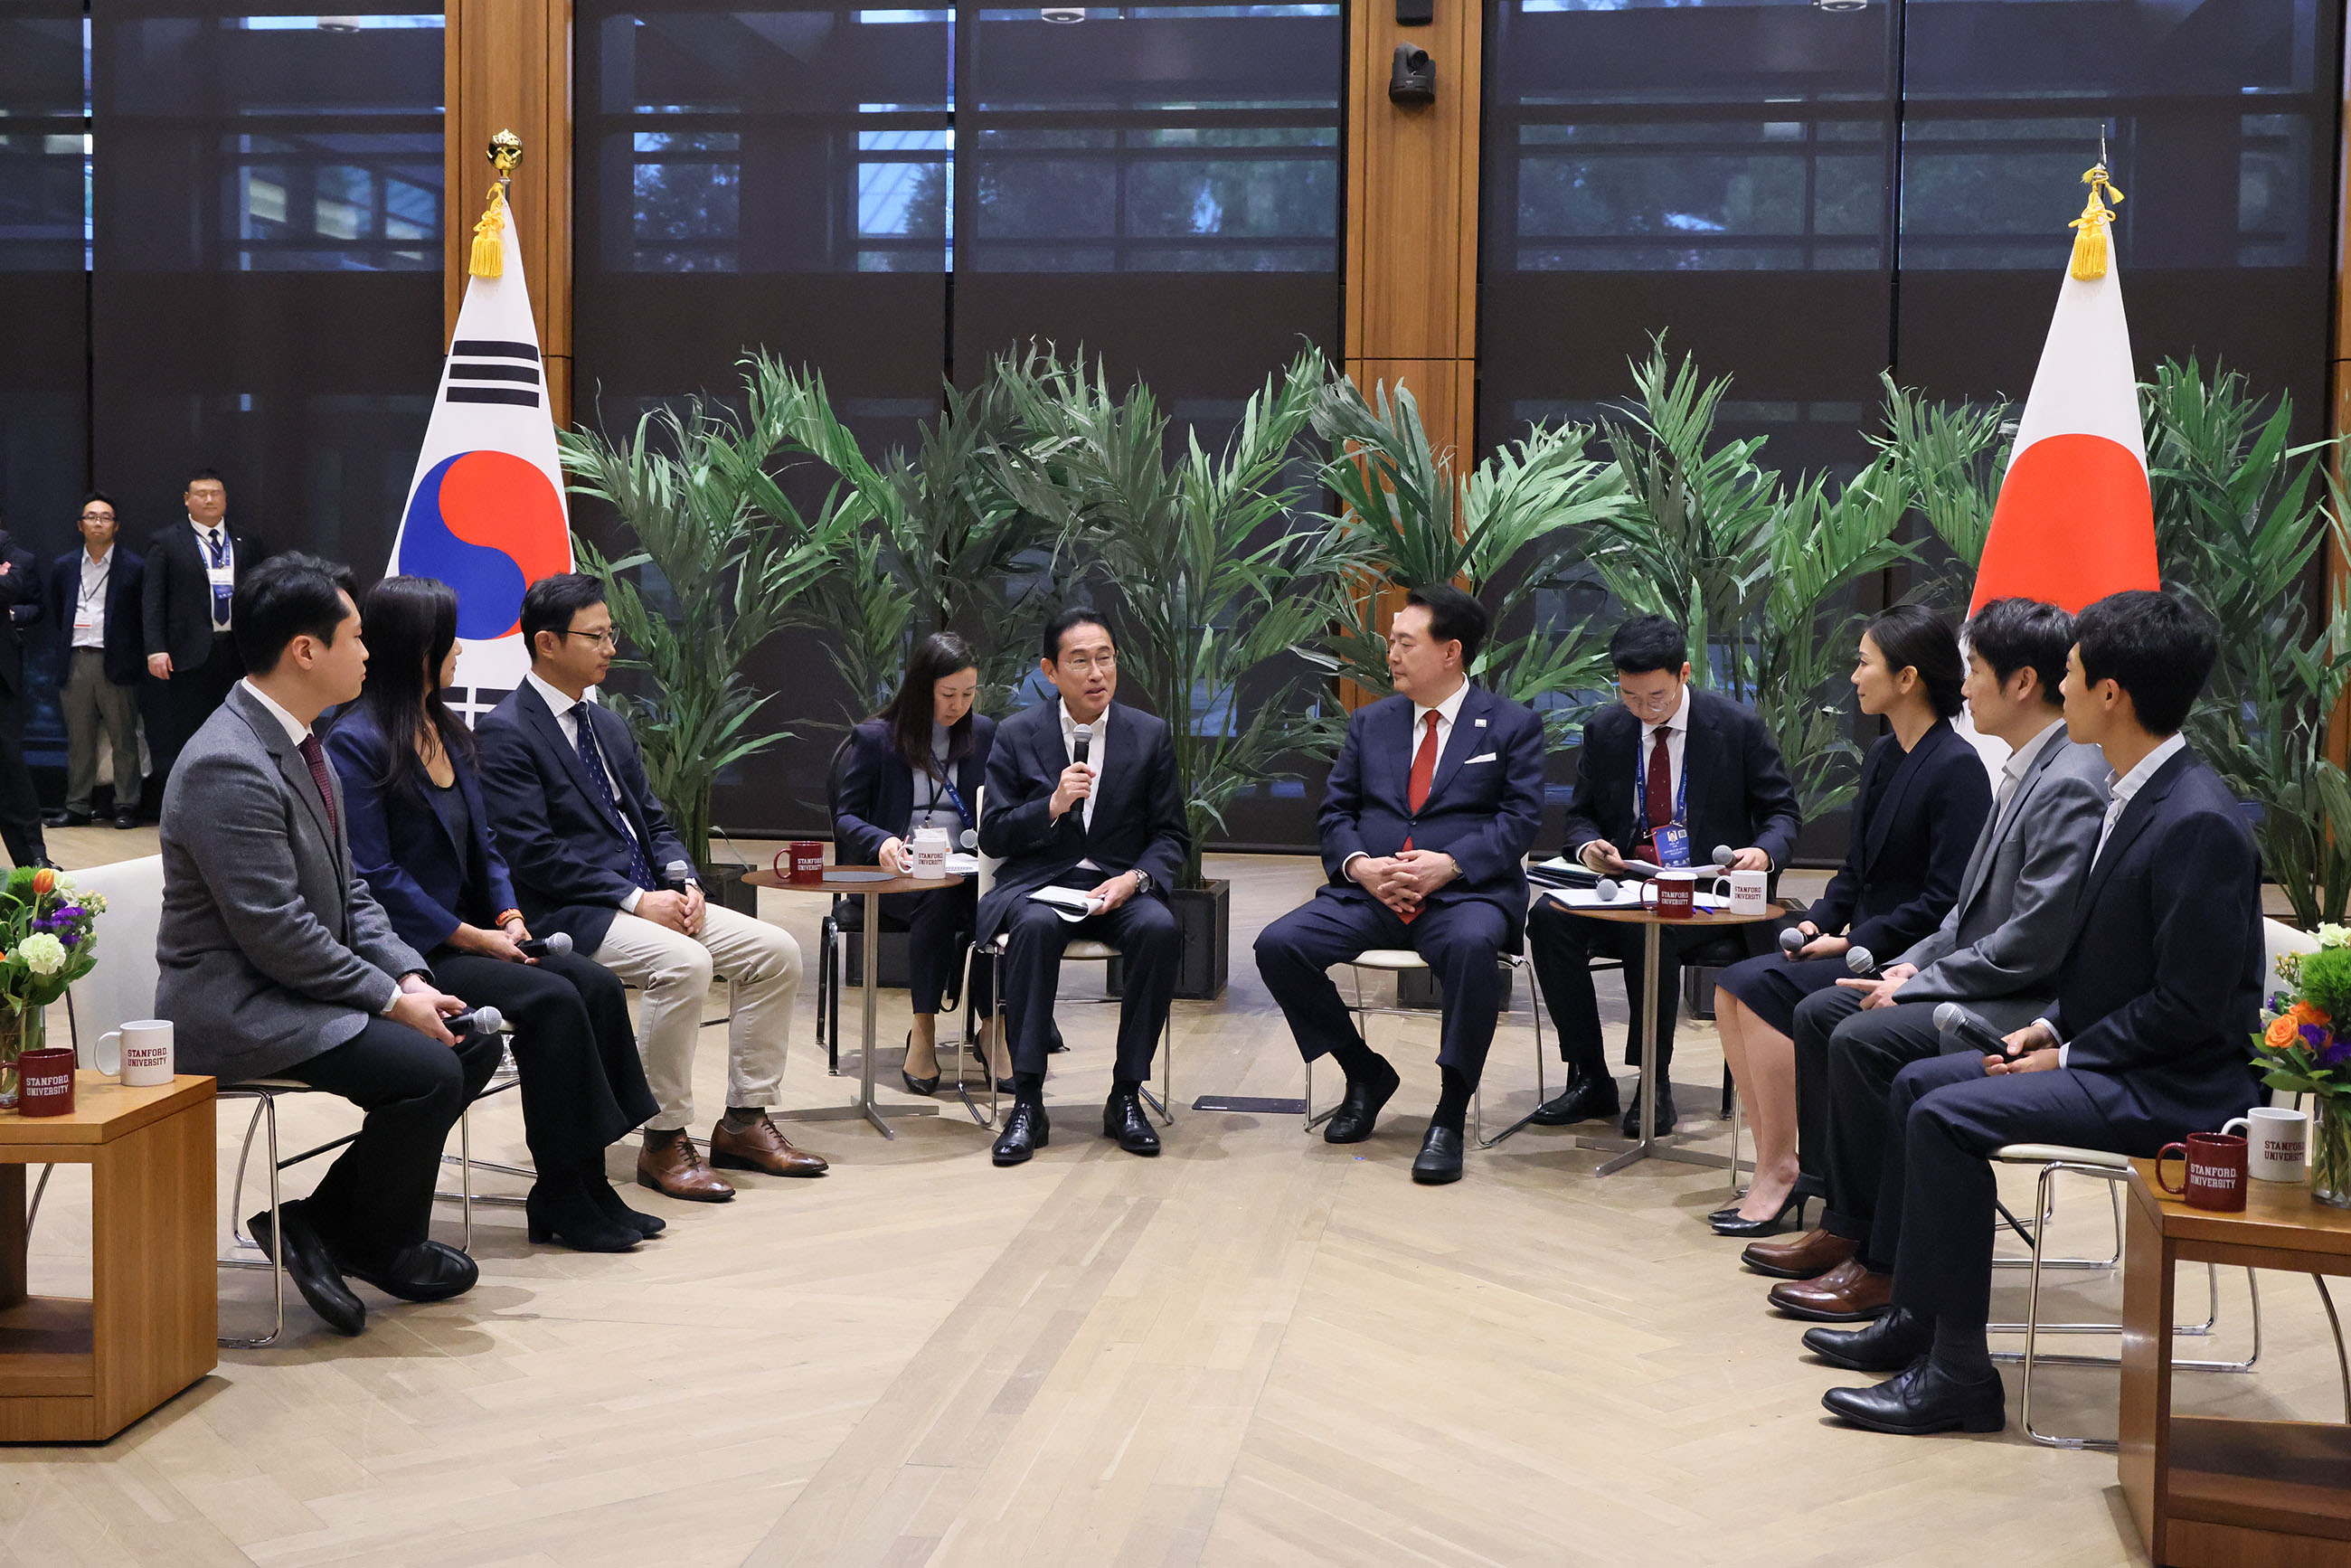 Prime Minister Kishida attending a roundtable with Japanese and Korean startup companies (2)